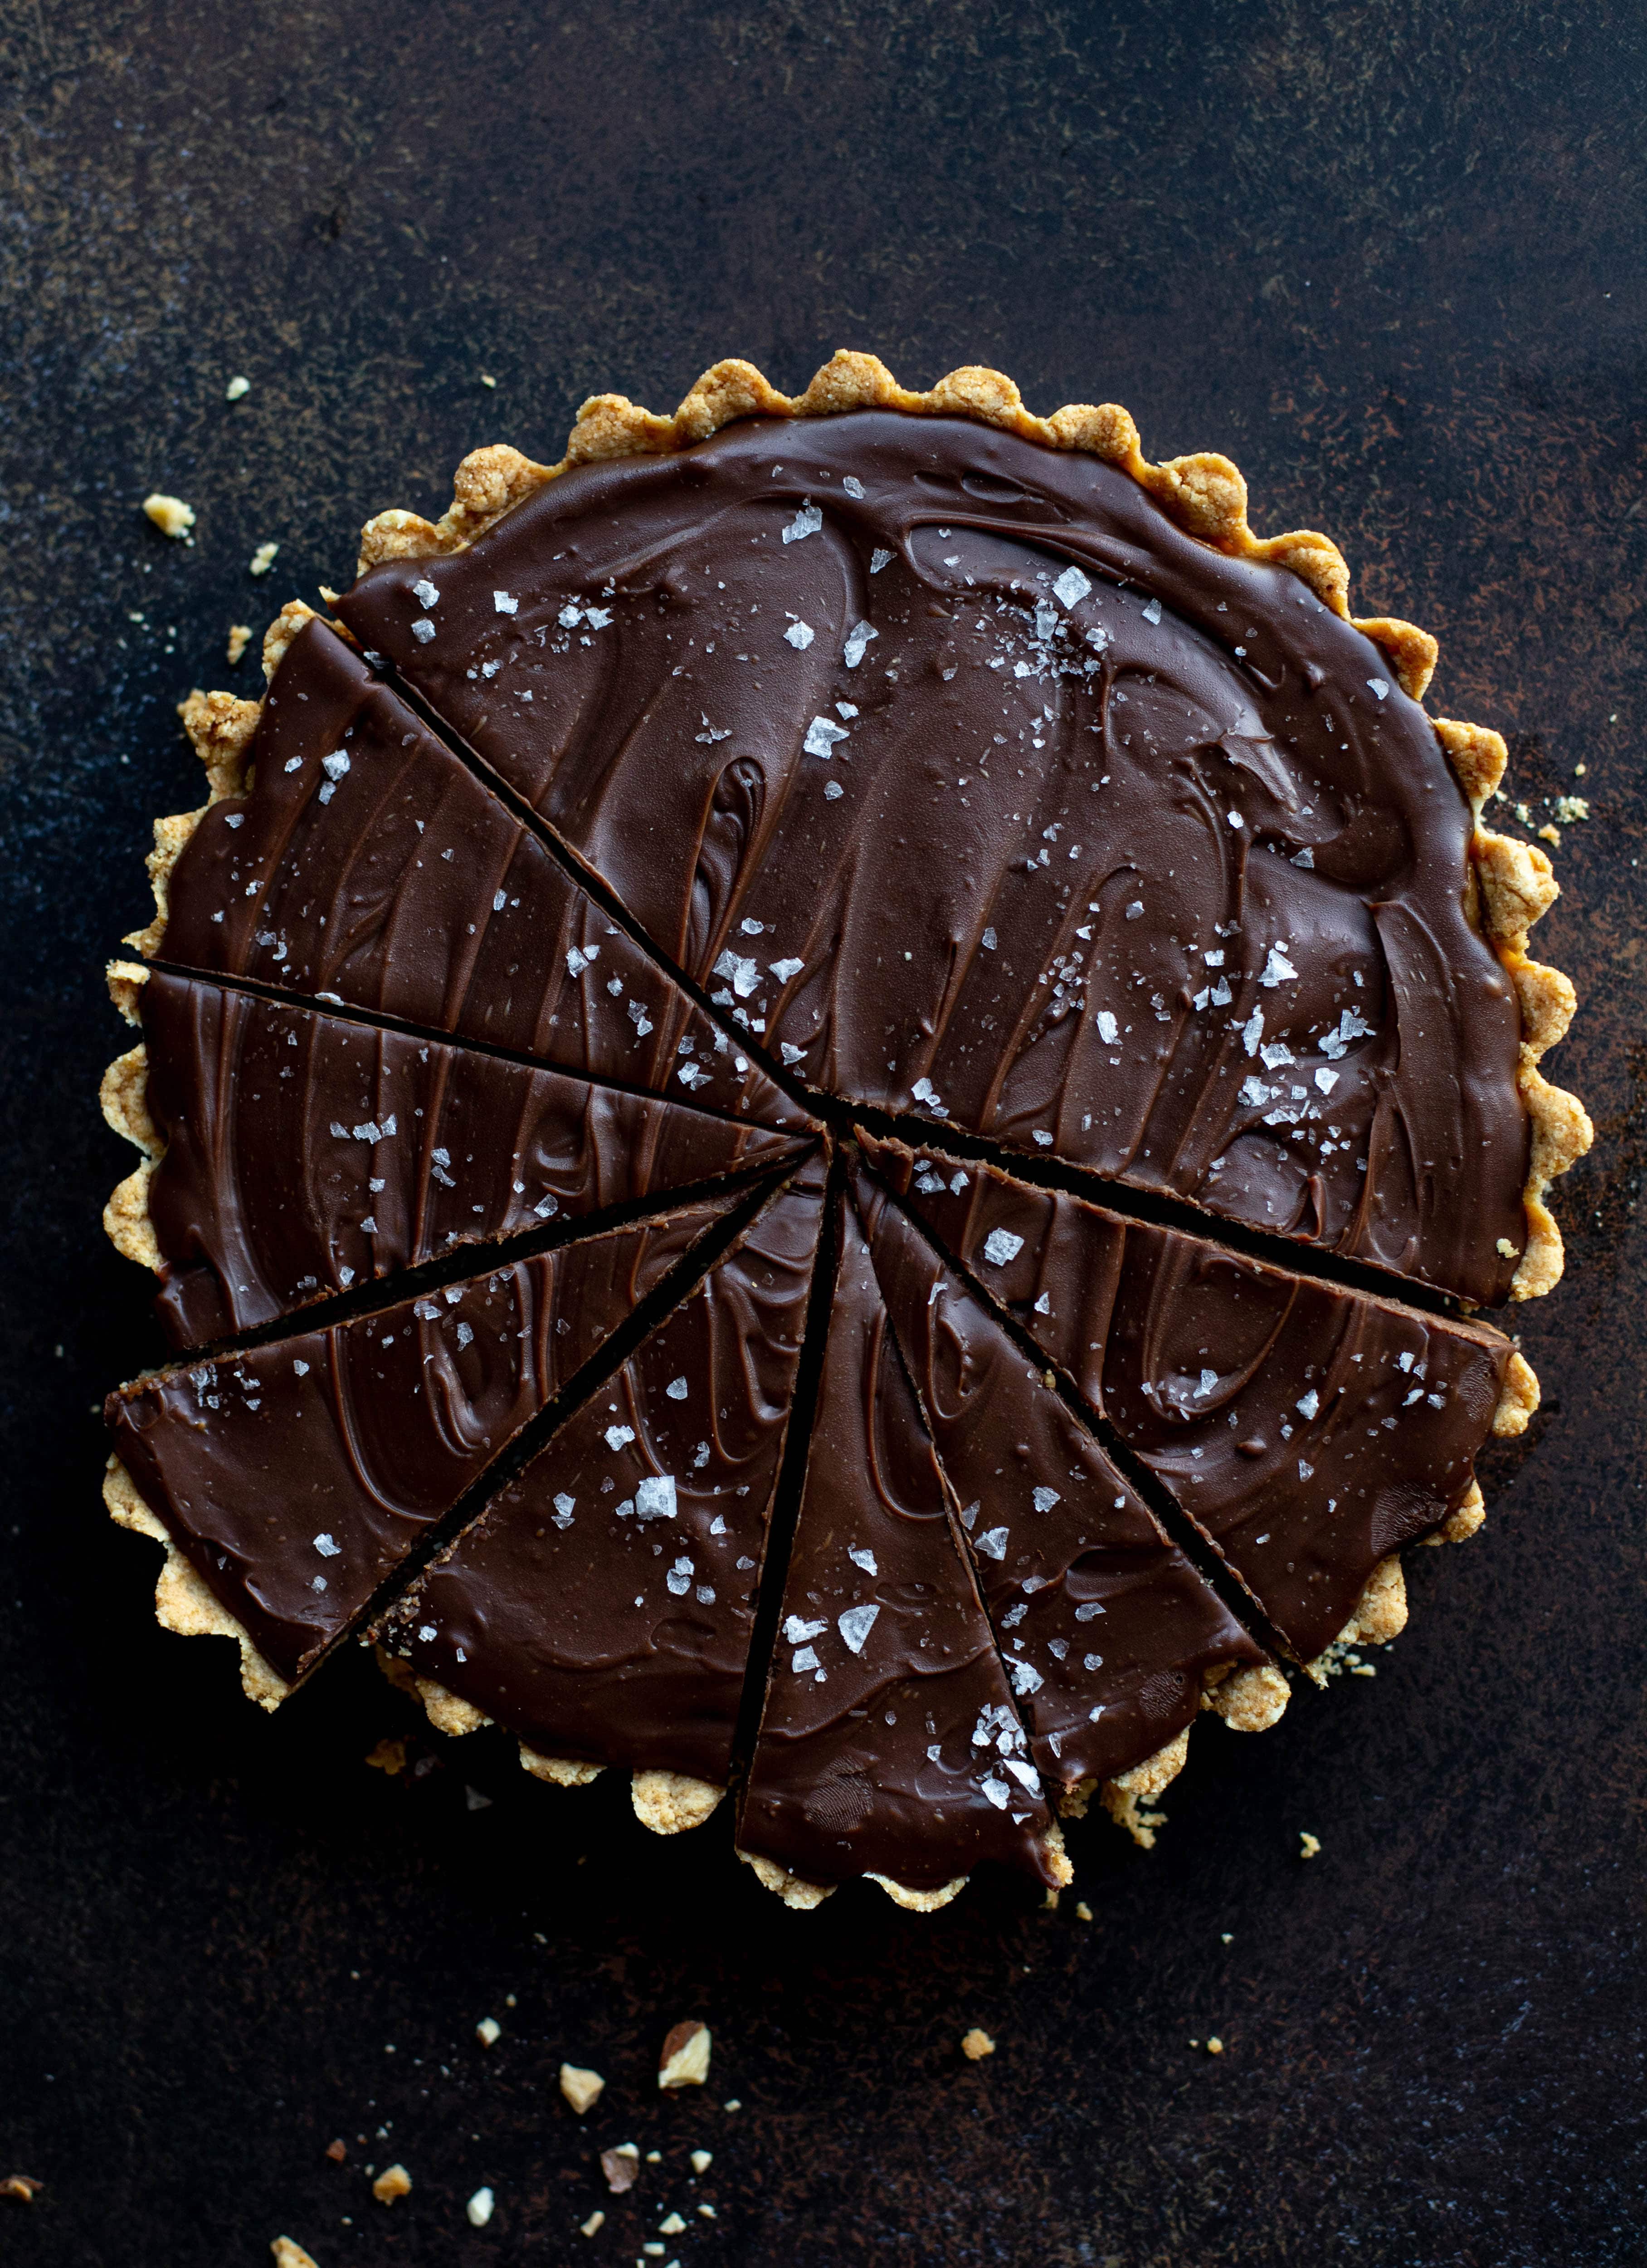 This snickers almond tart is made with an almond crust, homemade almond butter caramel and a chocolate ganache. It's to die for!